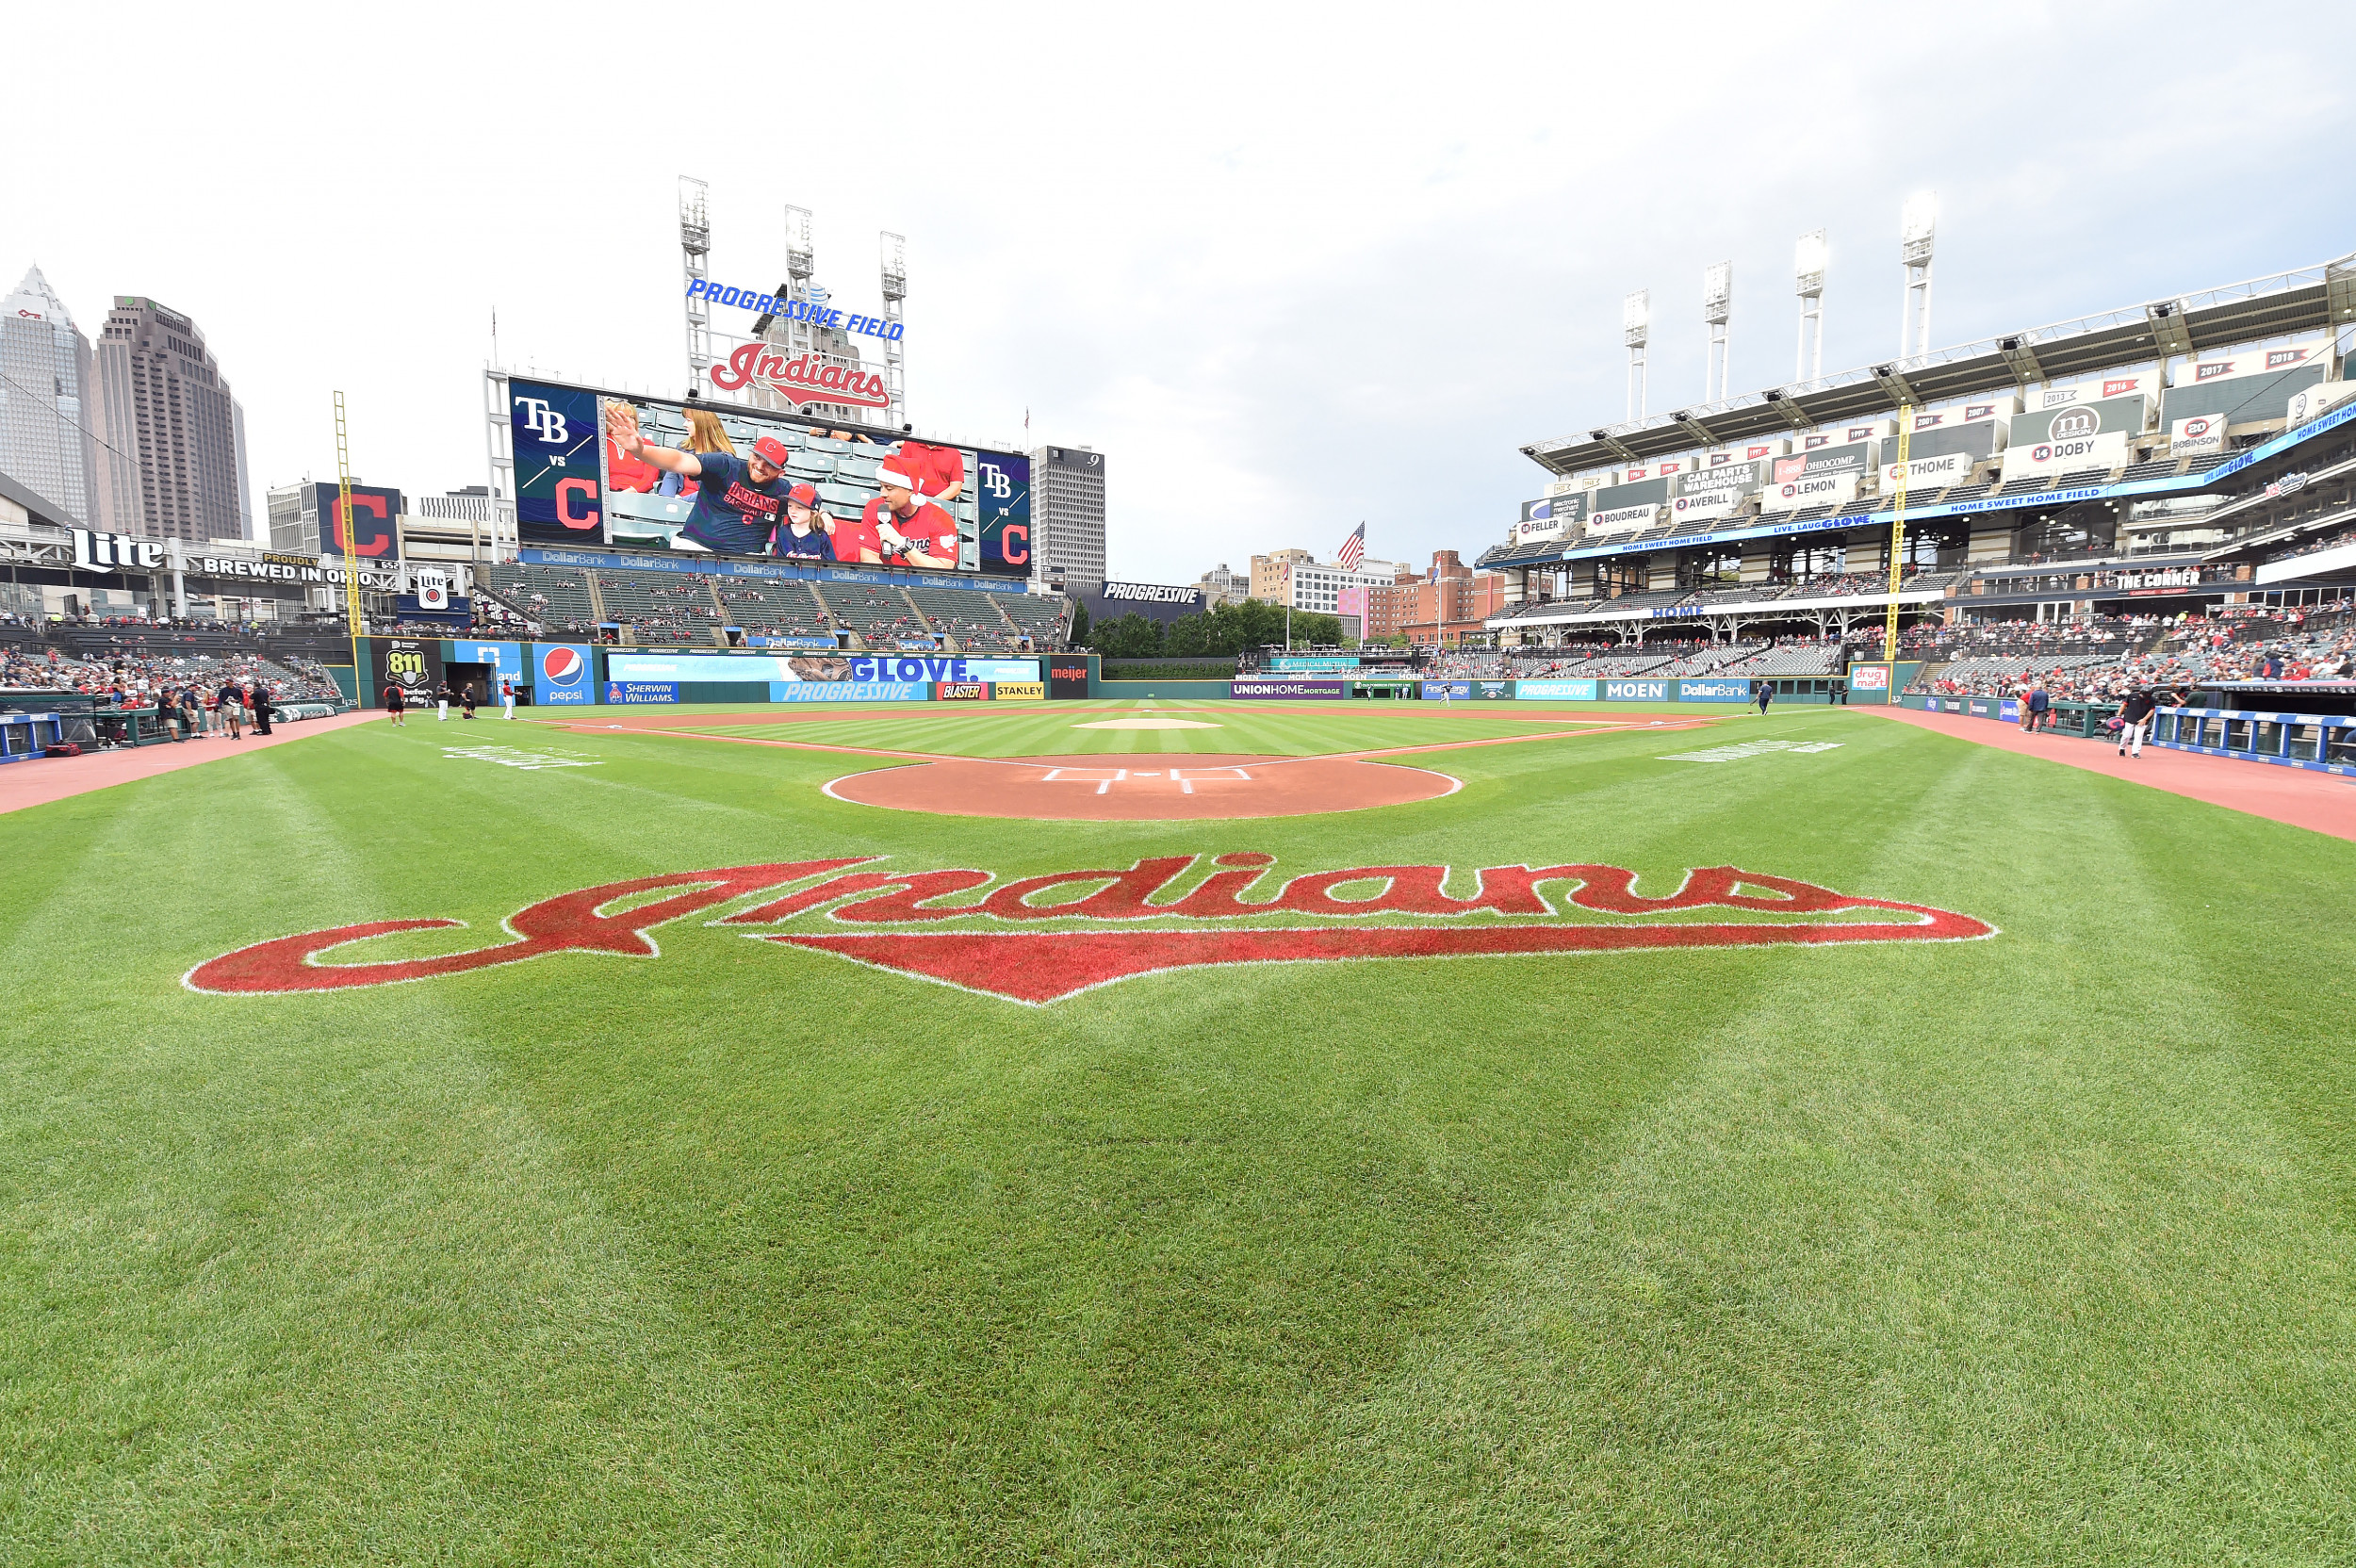 Cleveland Indians' Name Change Unsettled